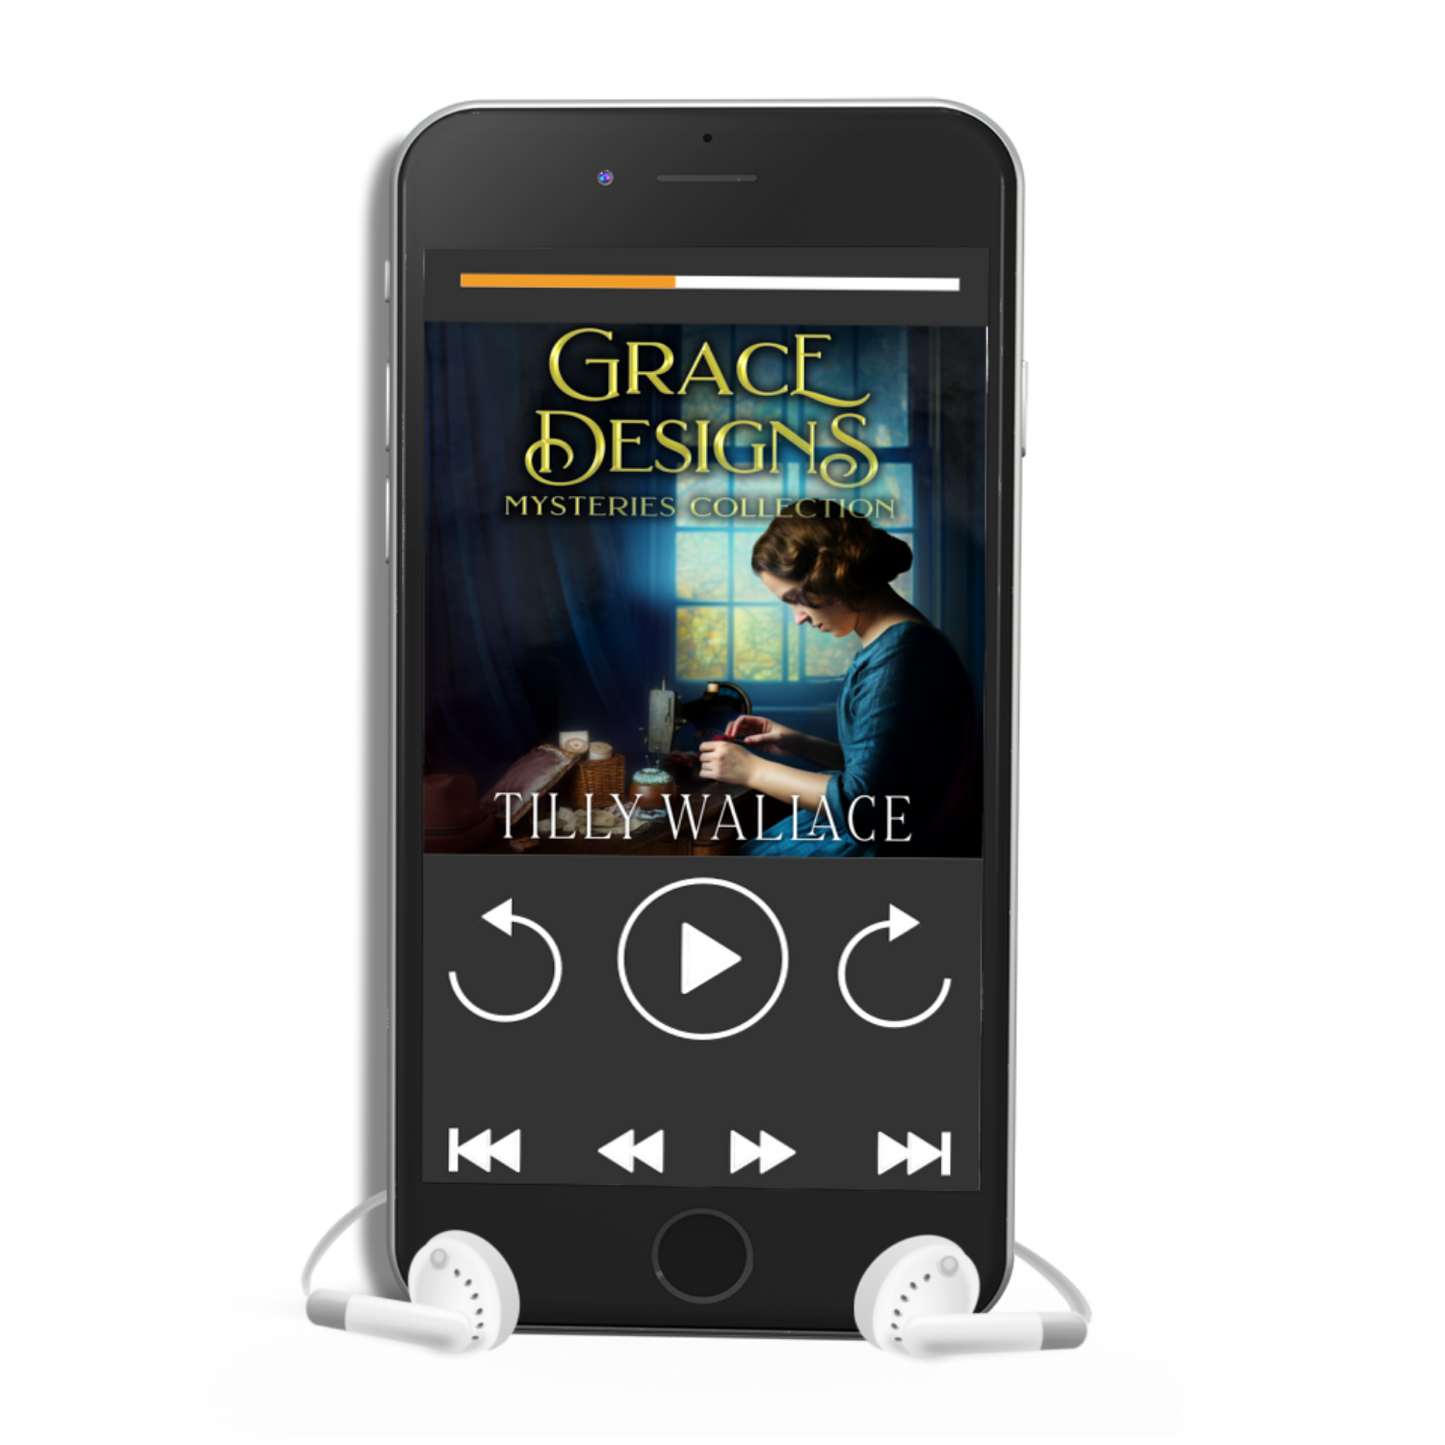 Grace Designs Mysteries Collection (audio)